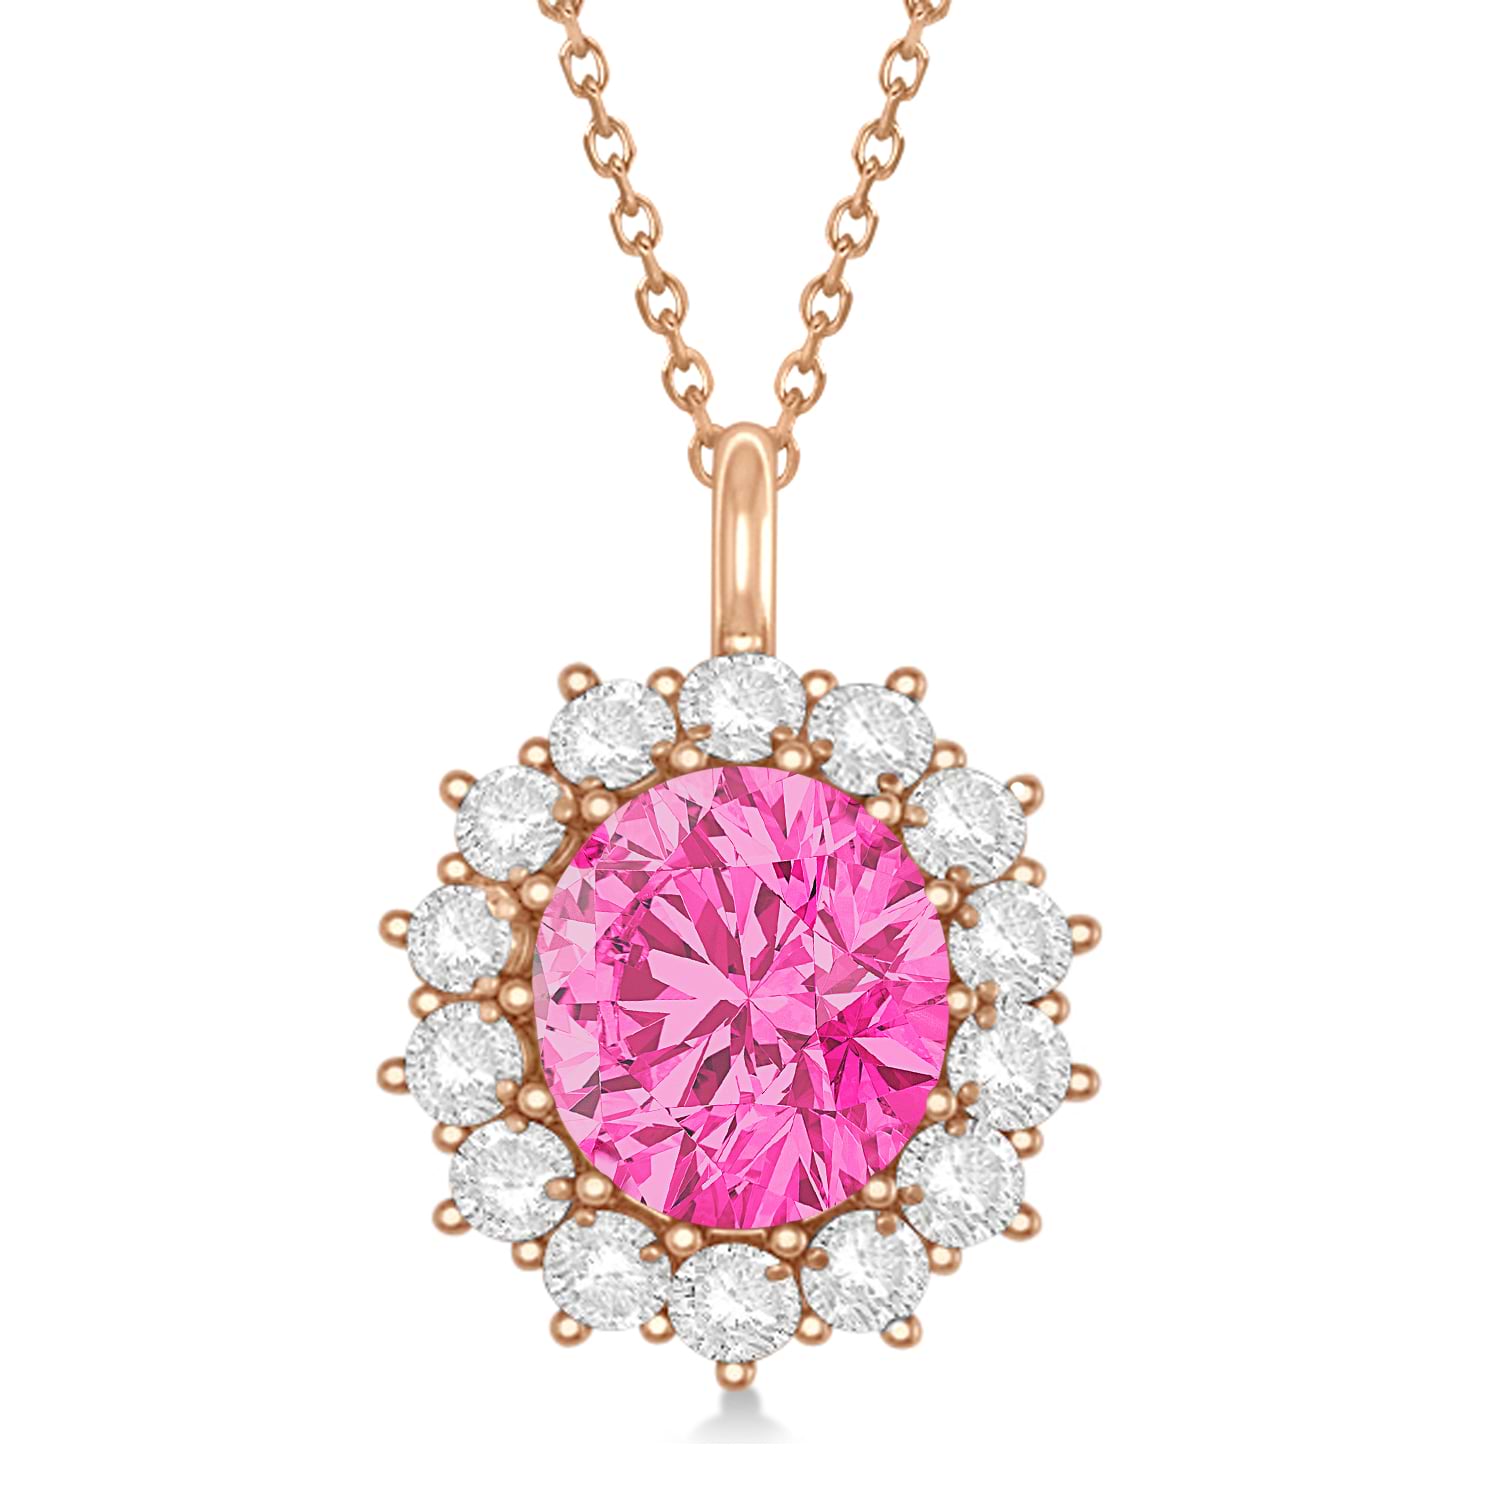 Oval Pink Tourmaline and Diamond Pendant Necklace 18K Rose Gold (5.40ctw)